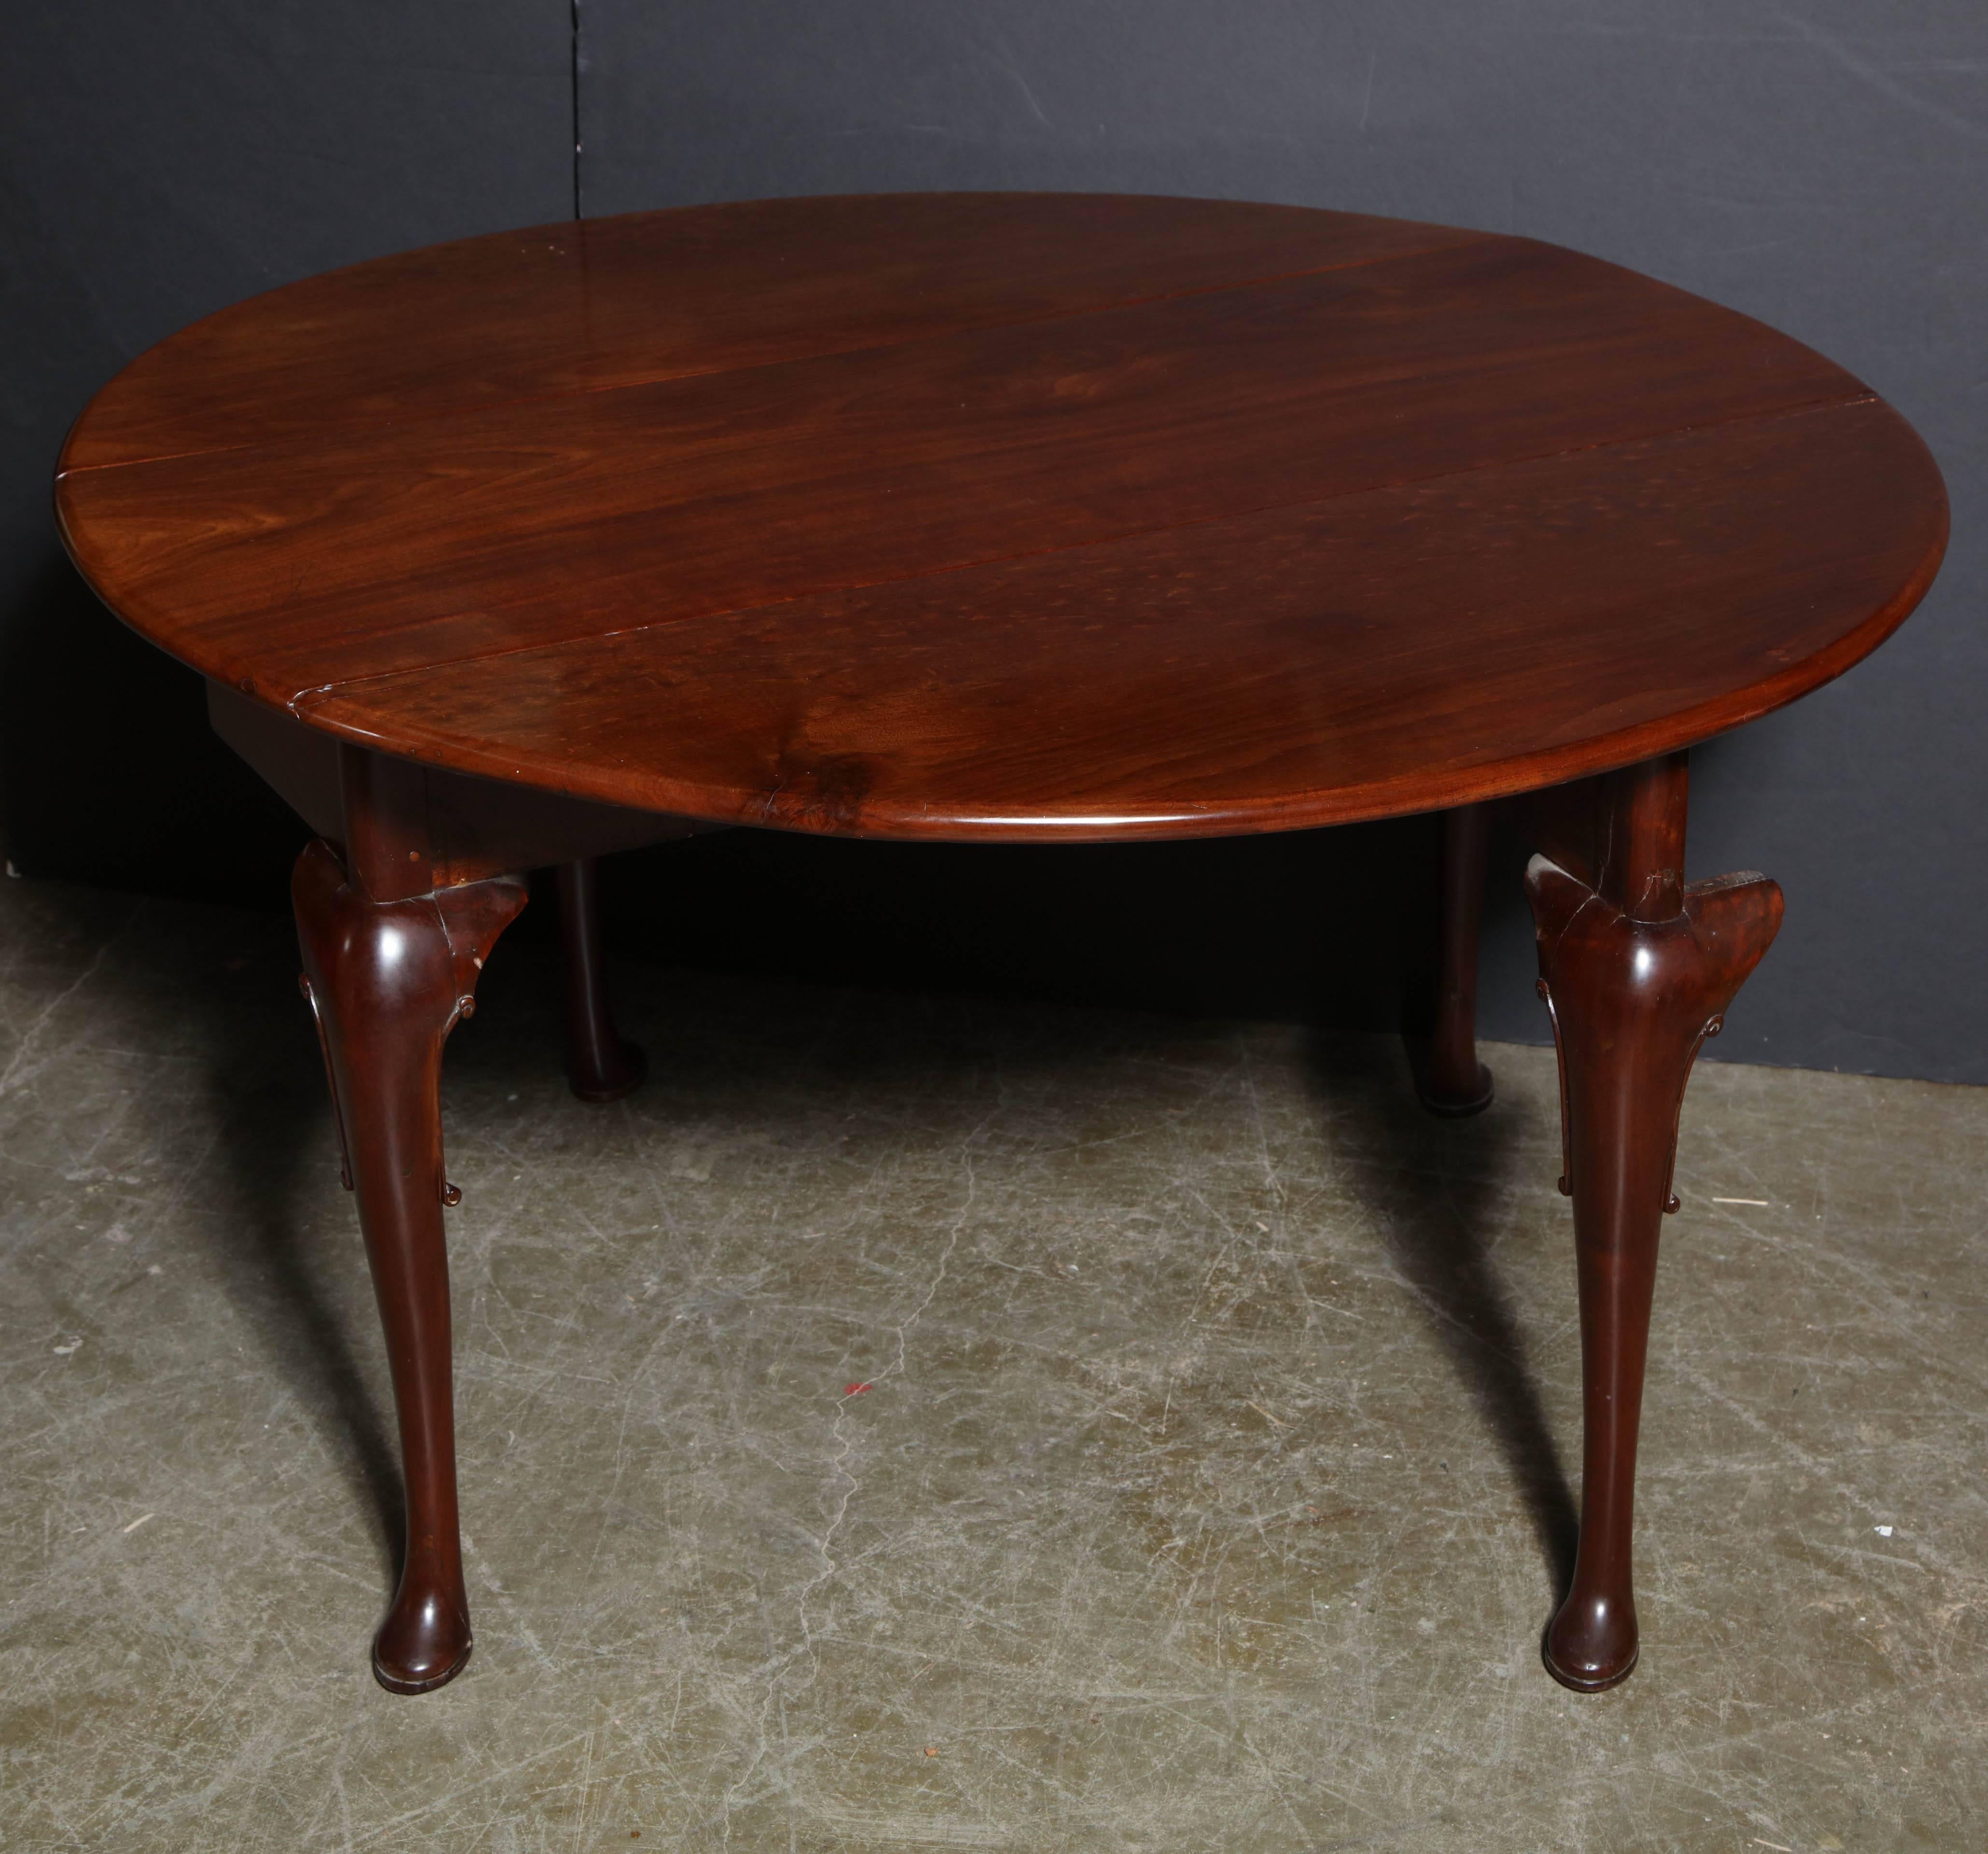 Wood English Queen Anne Drop-Leaf Table